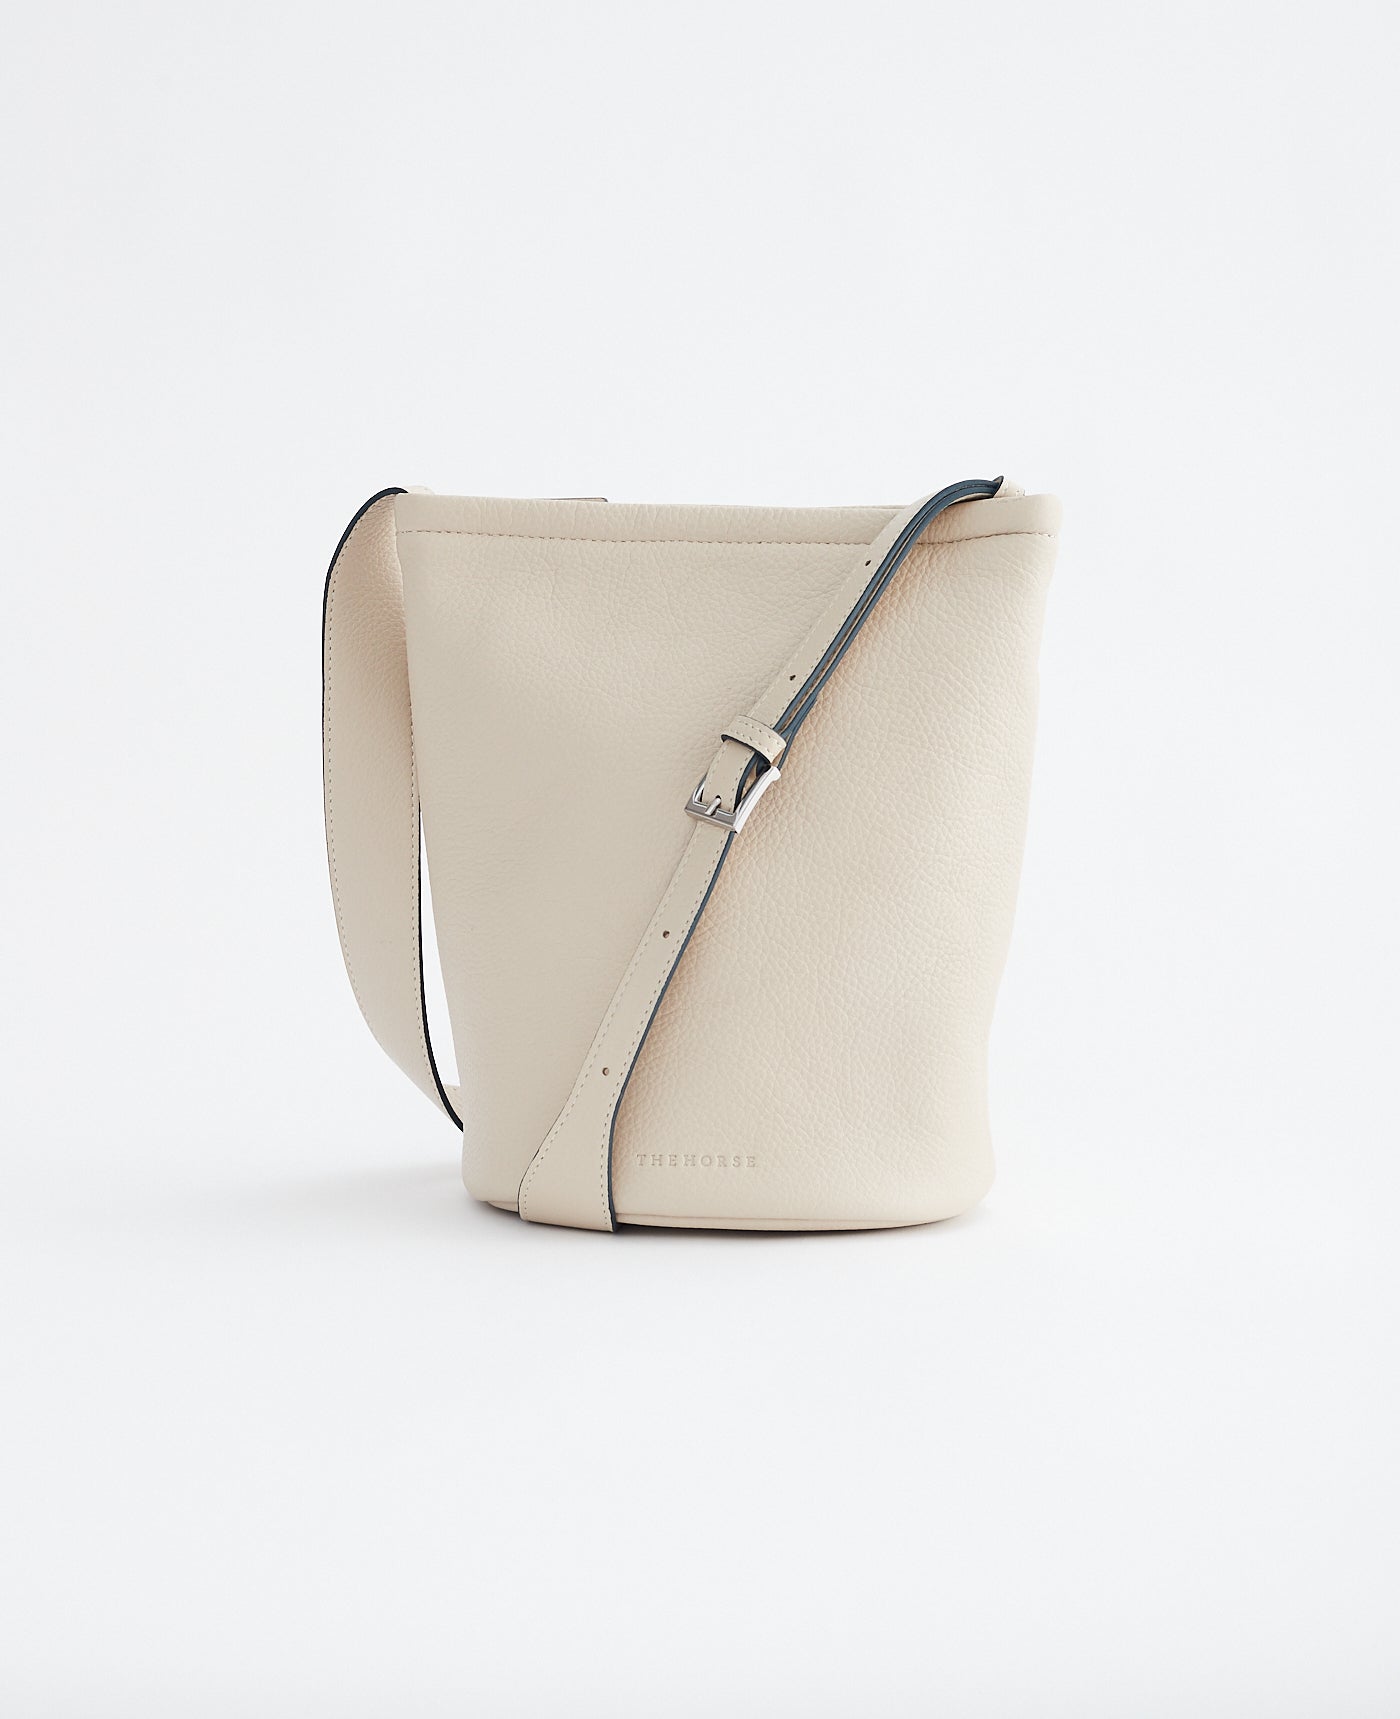 Rosa Leather Zip Bucket Bag in Oat by The Horse®